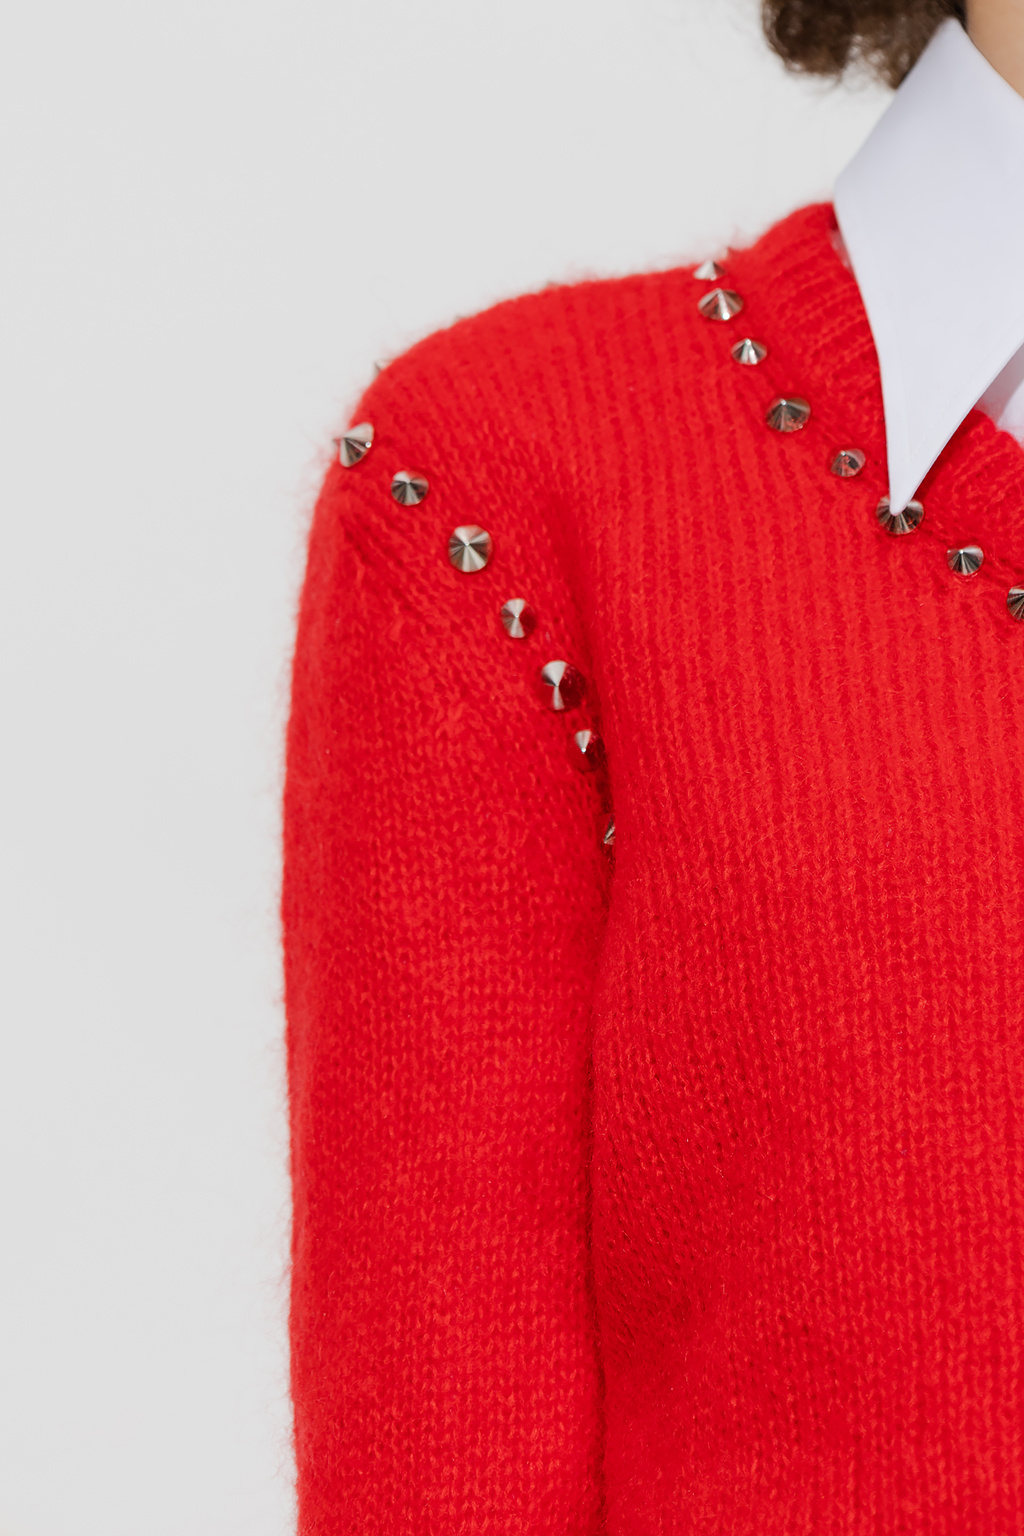 Gucci Studded sweater